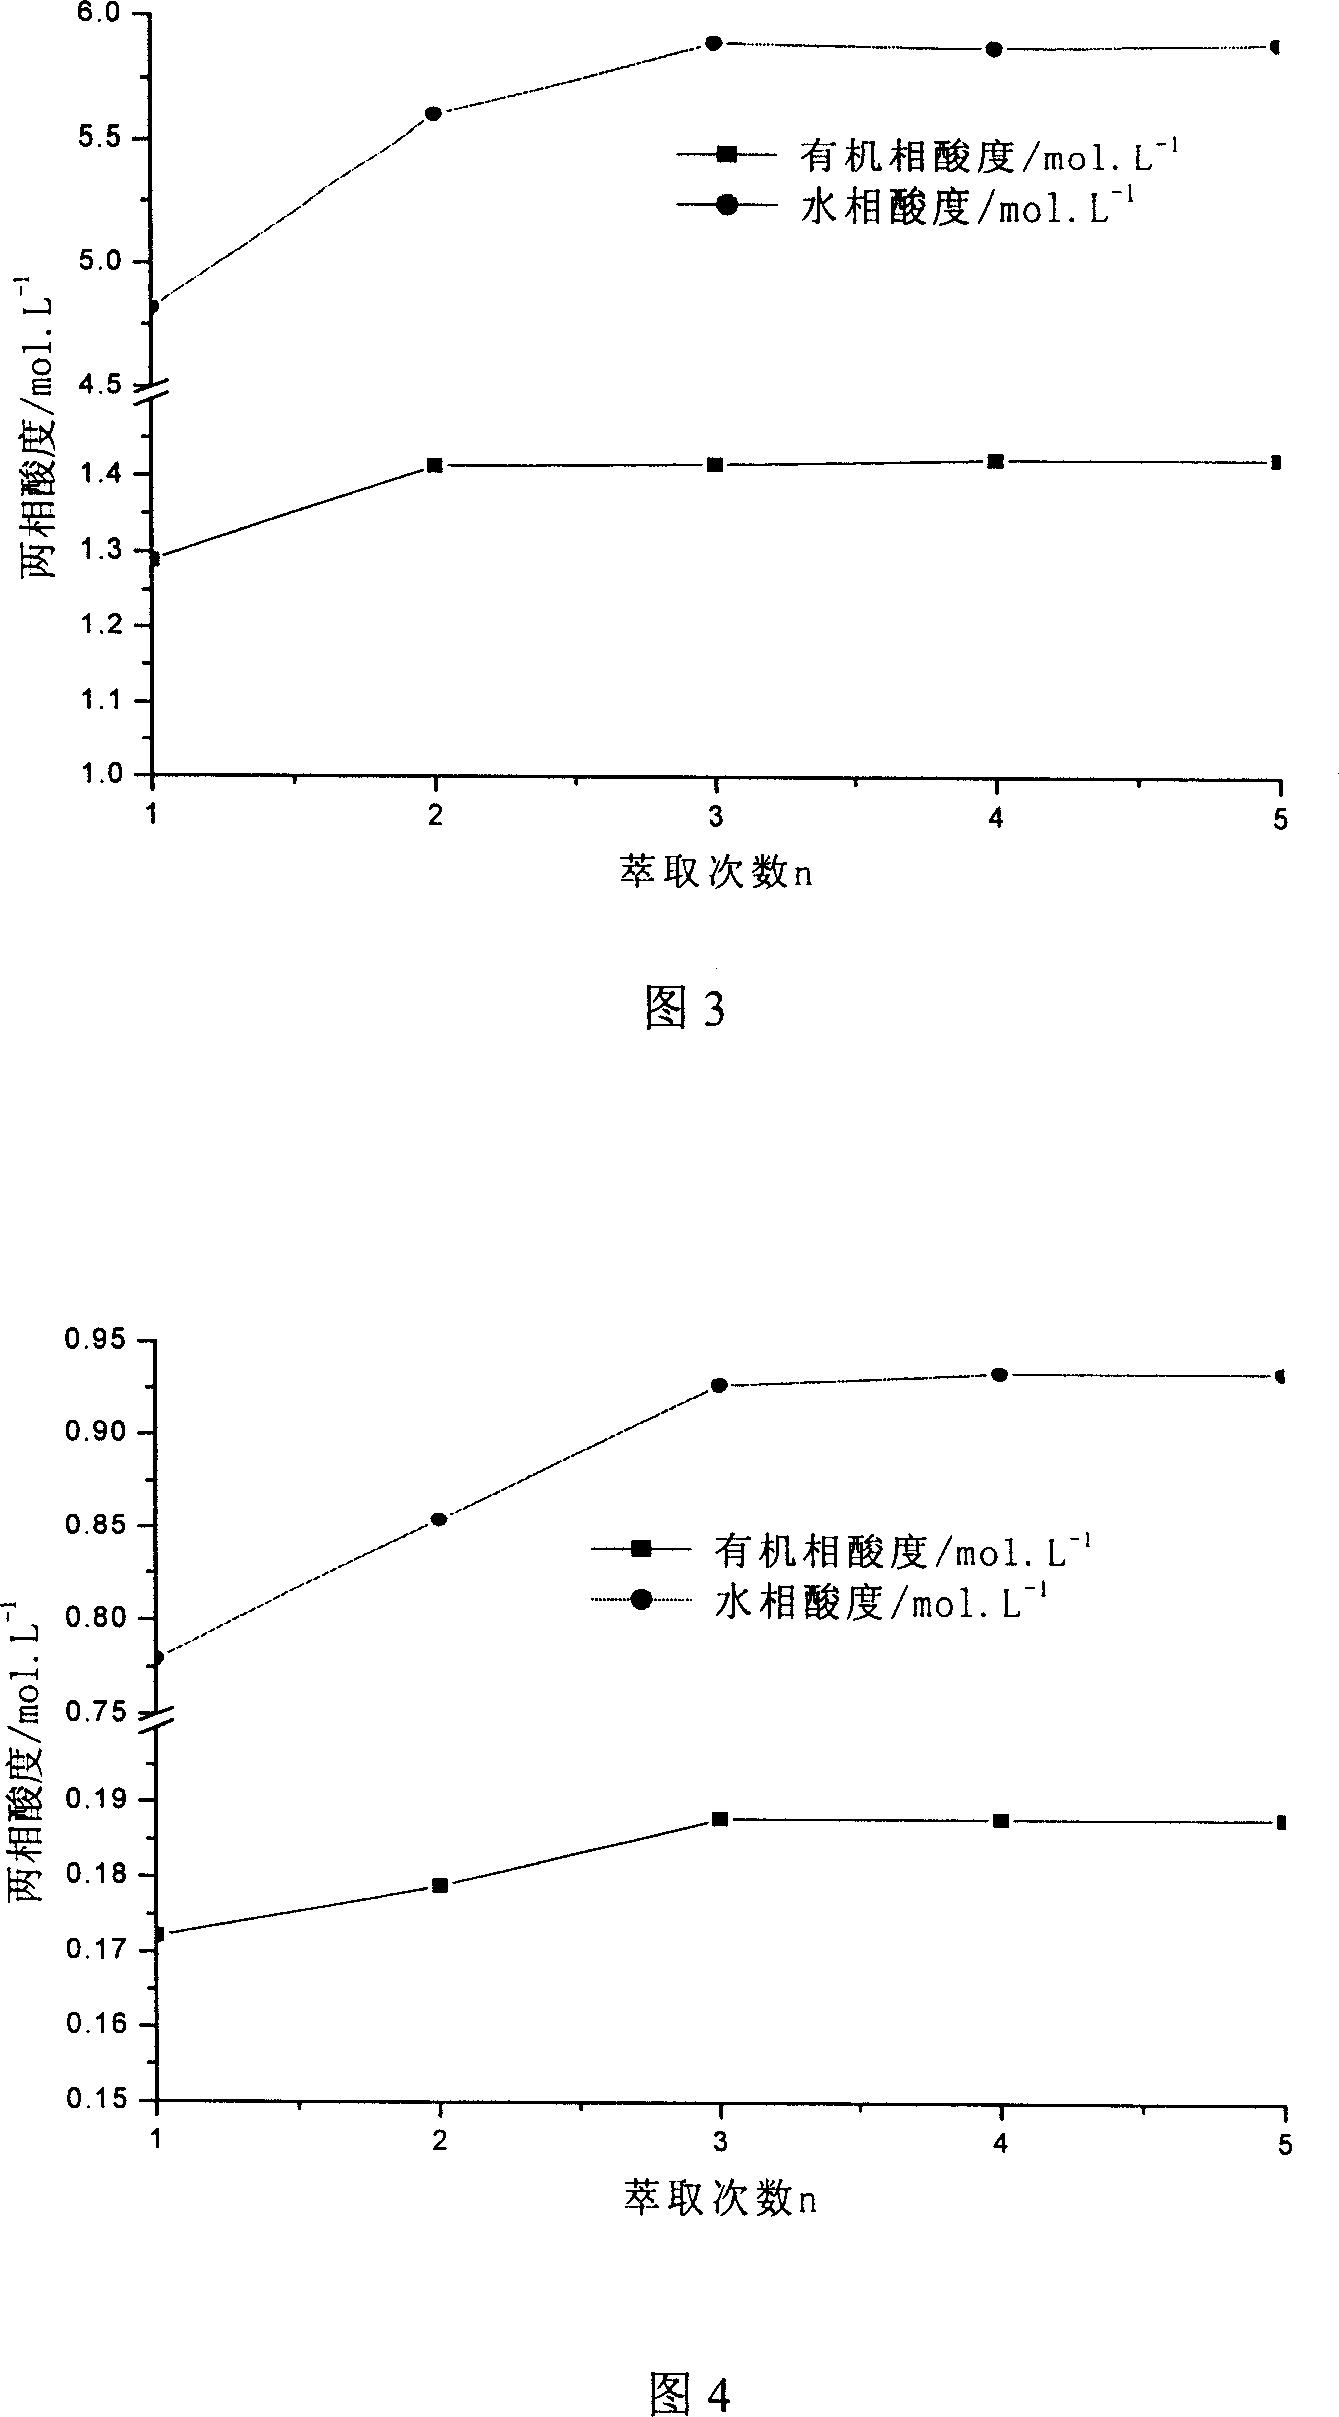 Concentration analysis of mixed trialkylphosphinyl